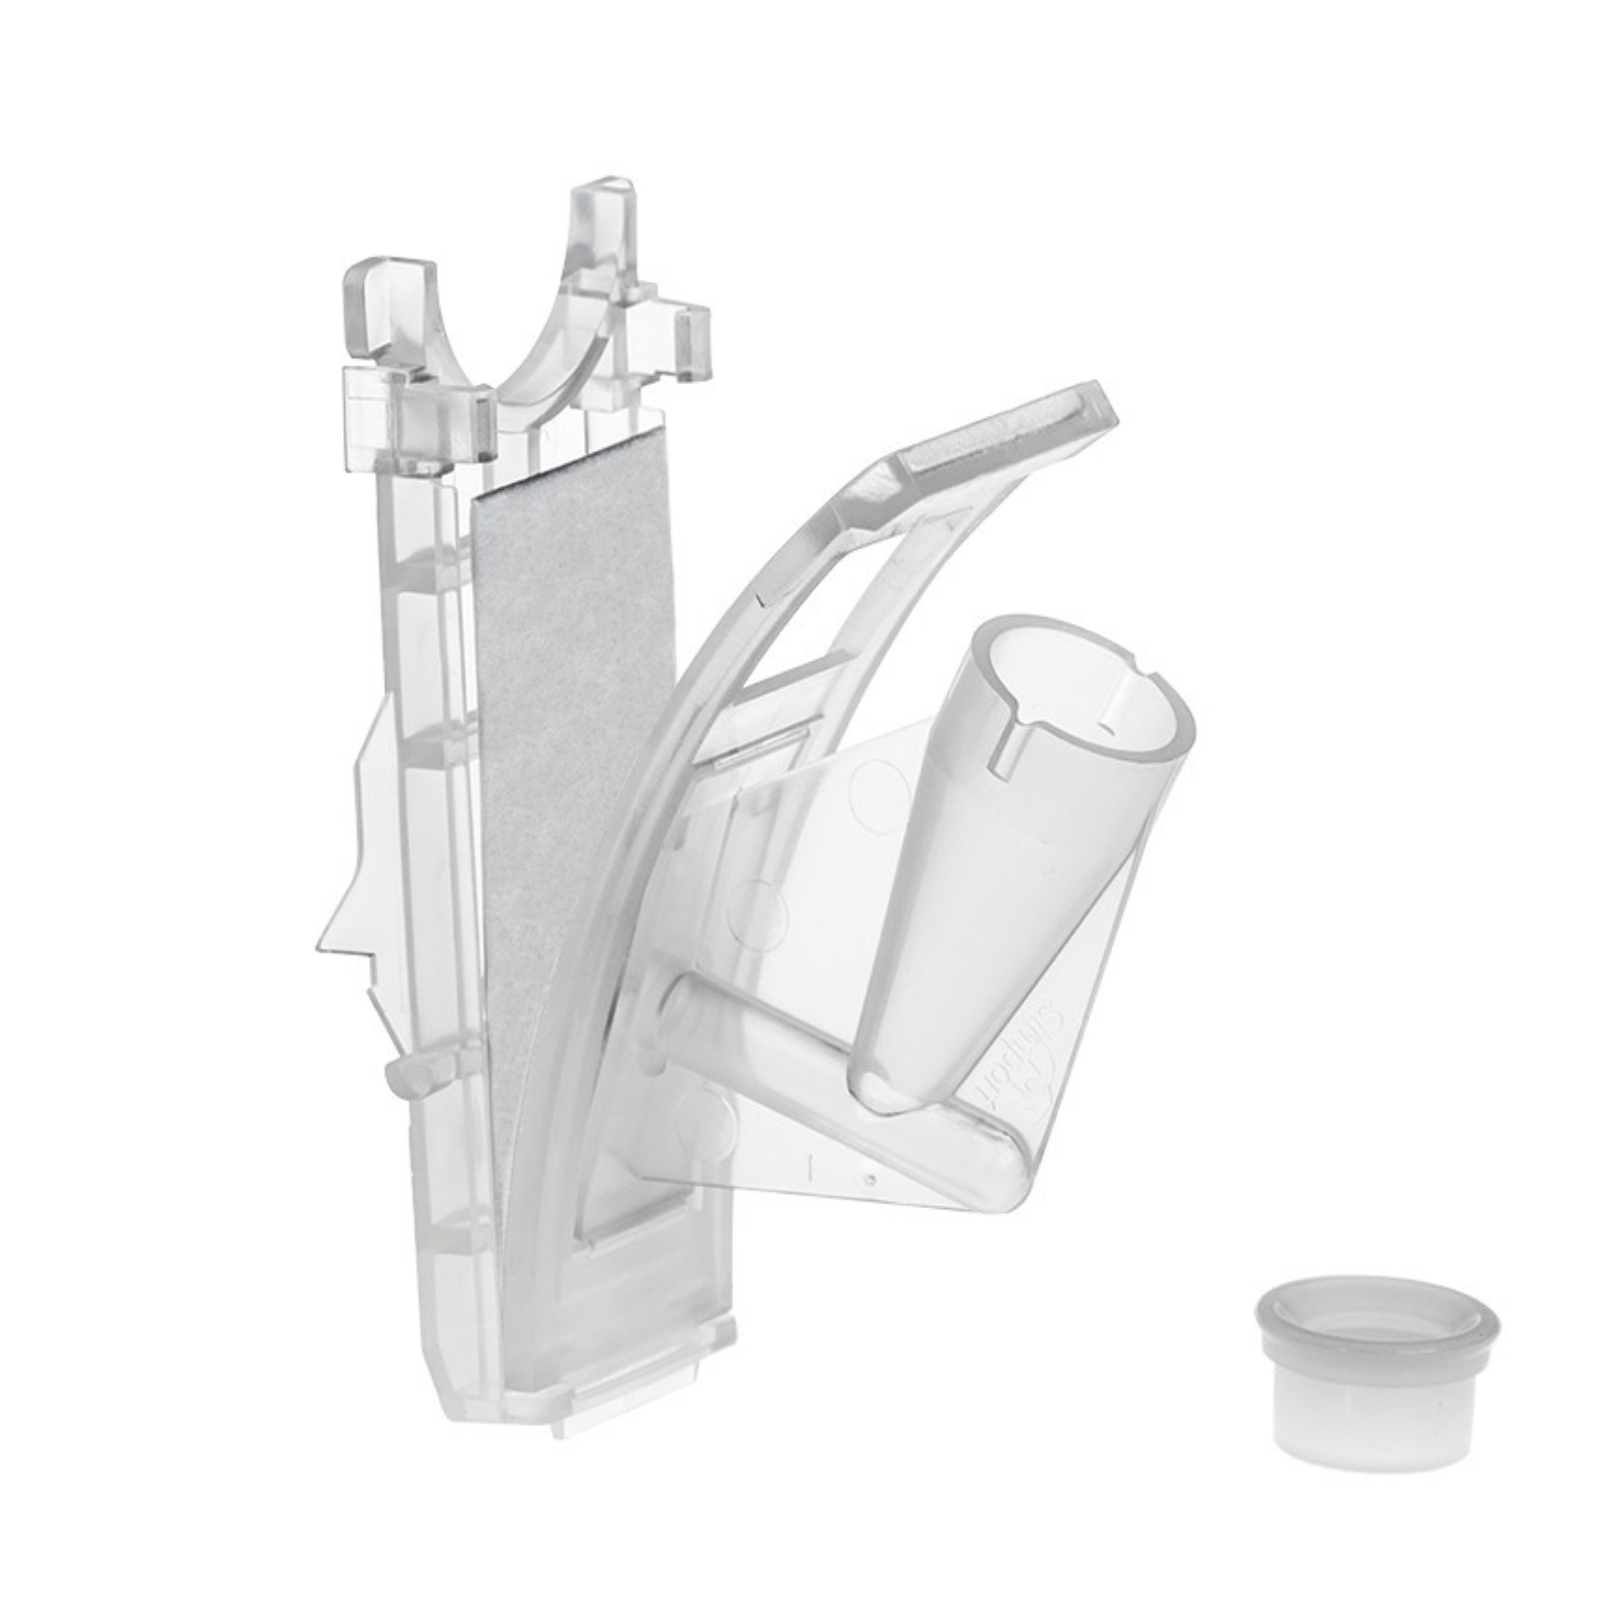 Simport M965-10FW – Cytosep Single Funnel With White Filter Pape